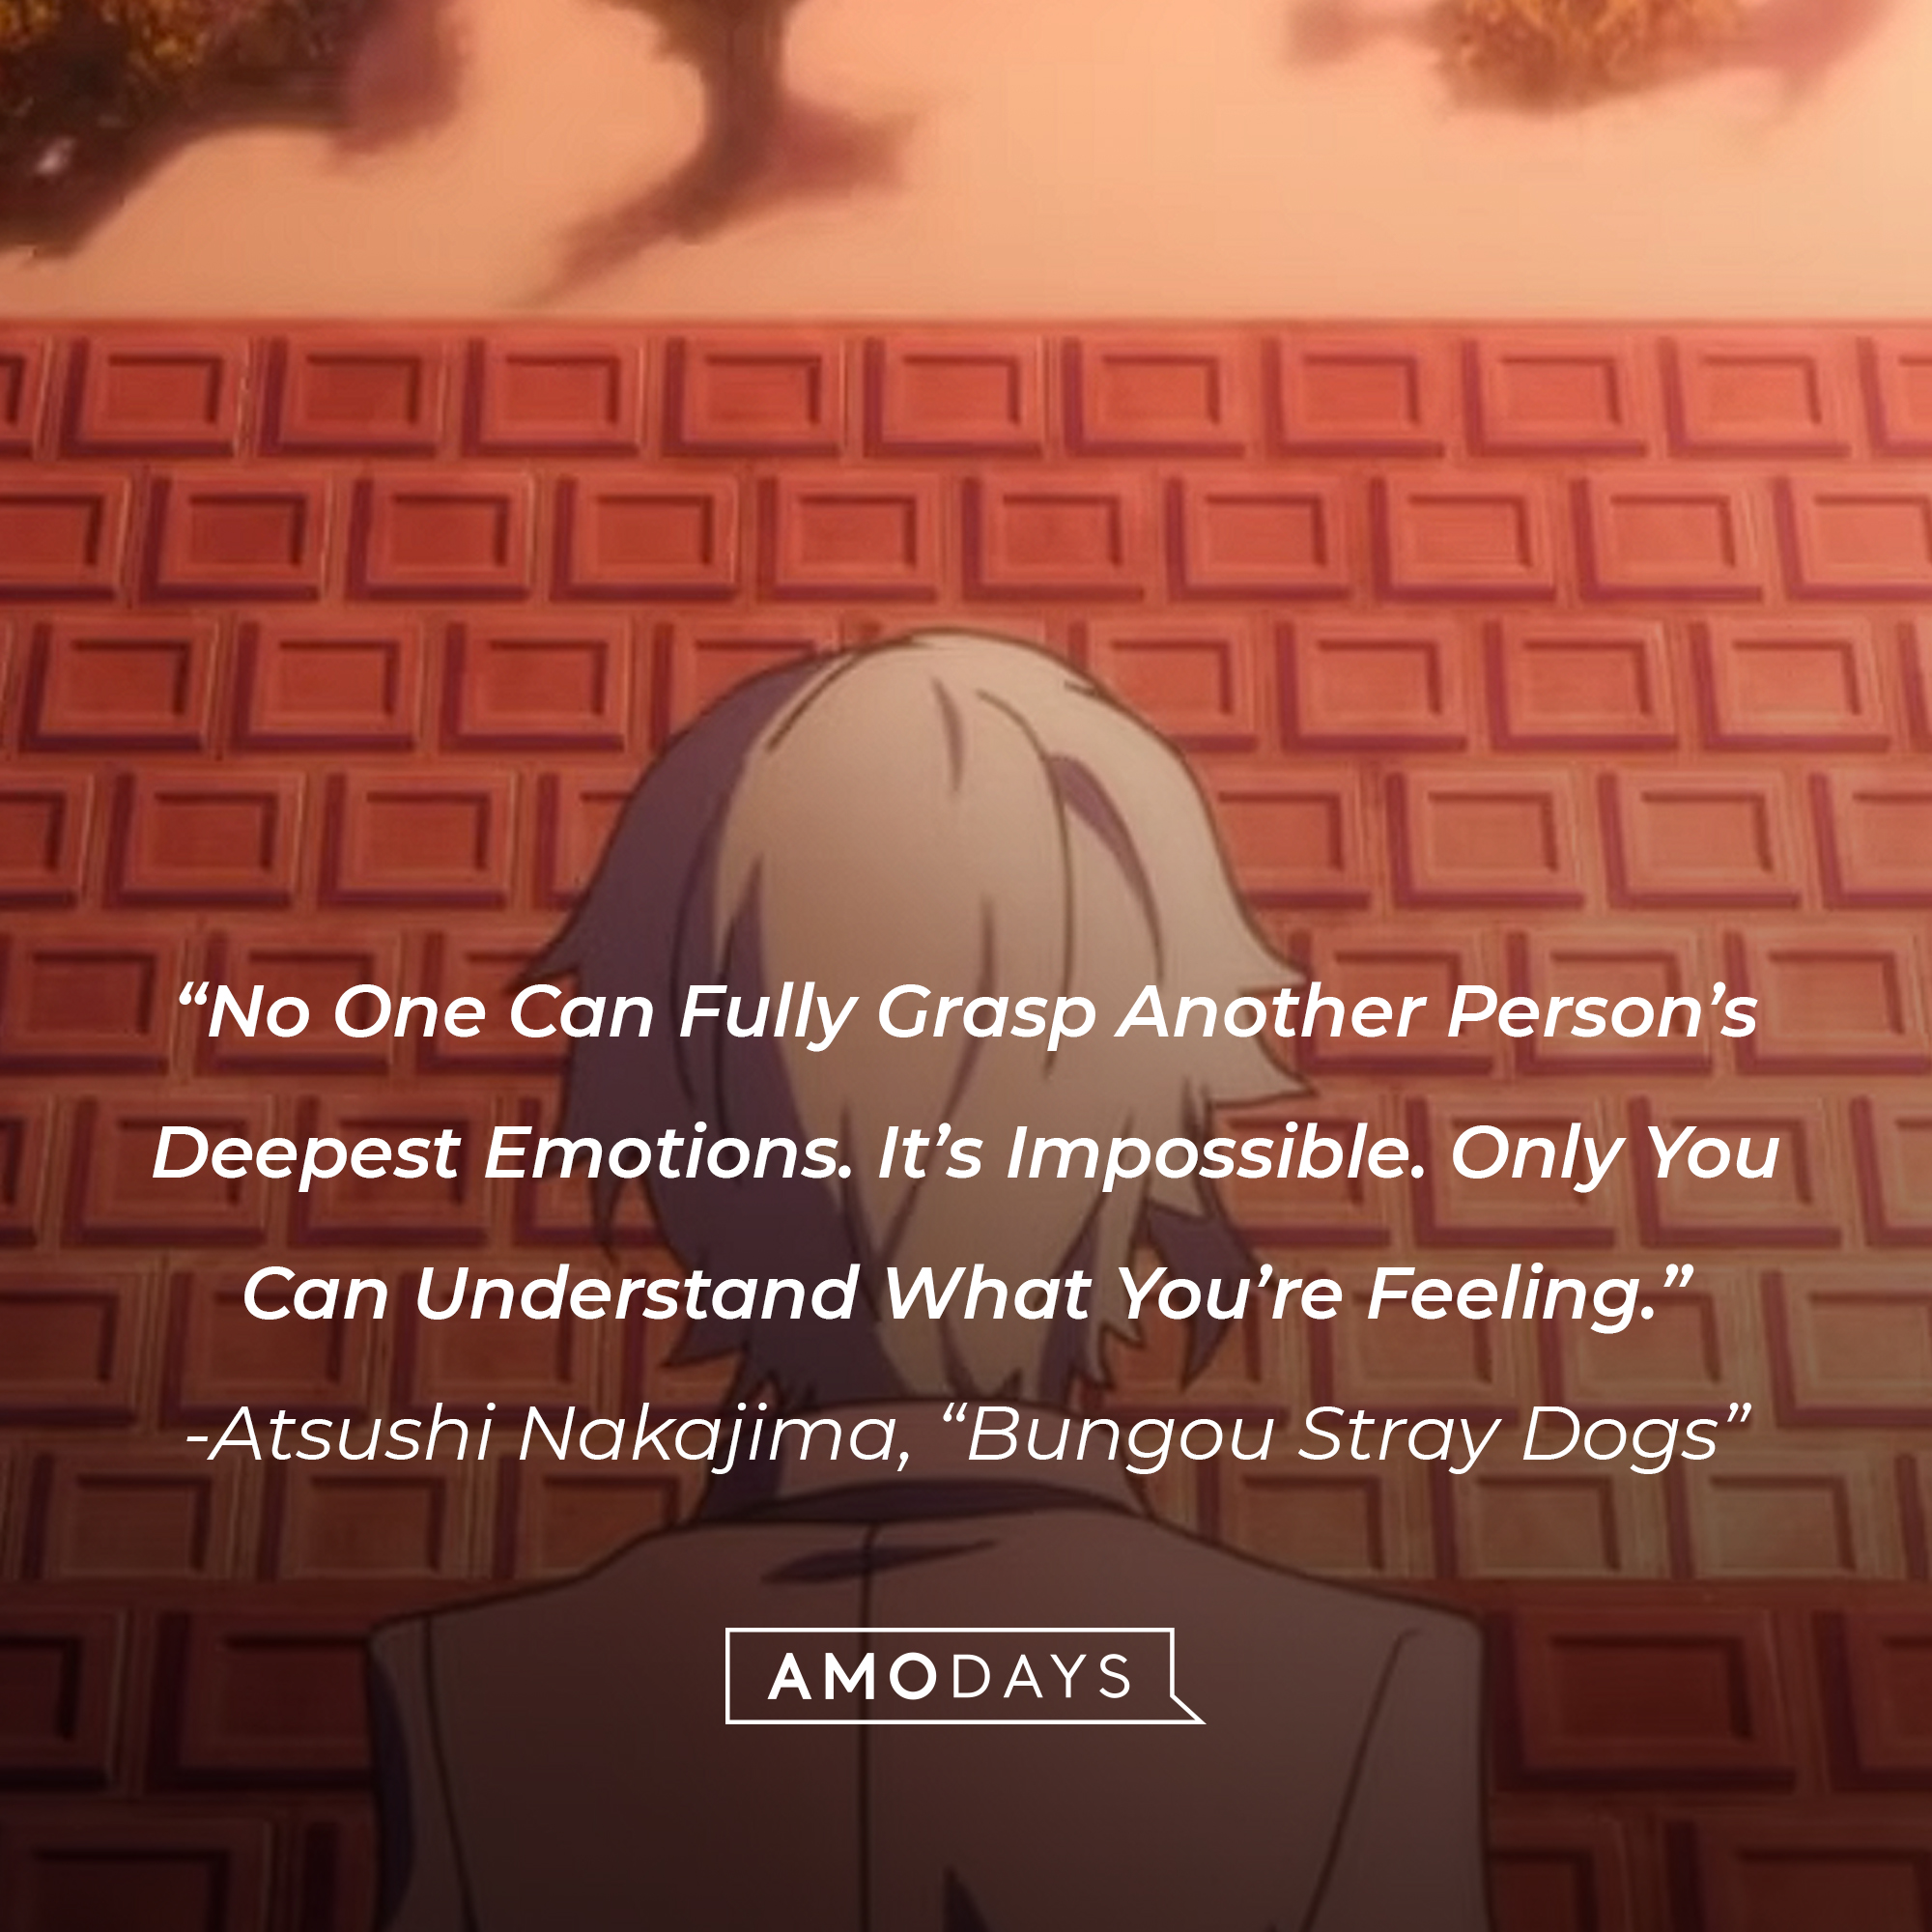 Atsushi Nakajima's quote: "No One Can Fully Grasp Another Person’s Deepest Emotions. It’s Impossible. Only You Can Understand What You’re Feeling.” | Image: youtube.com/Crunchyroll Collection